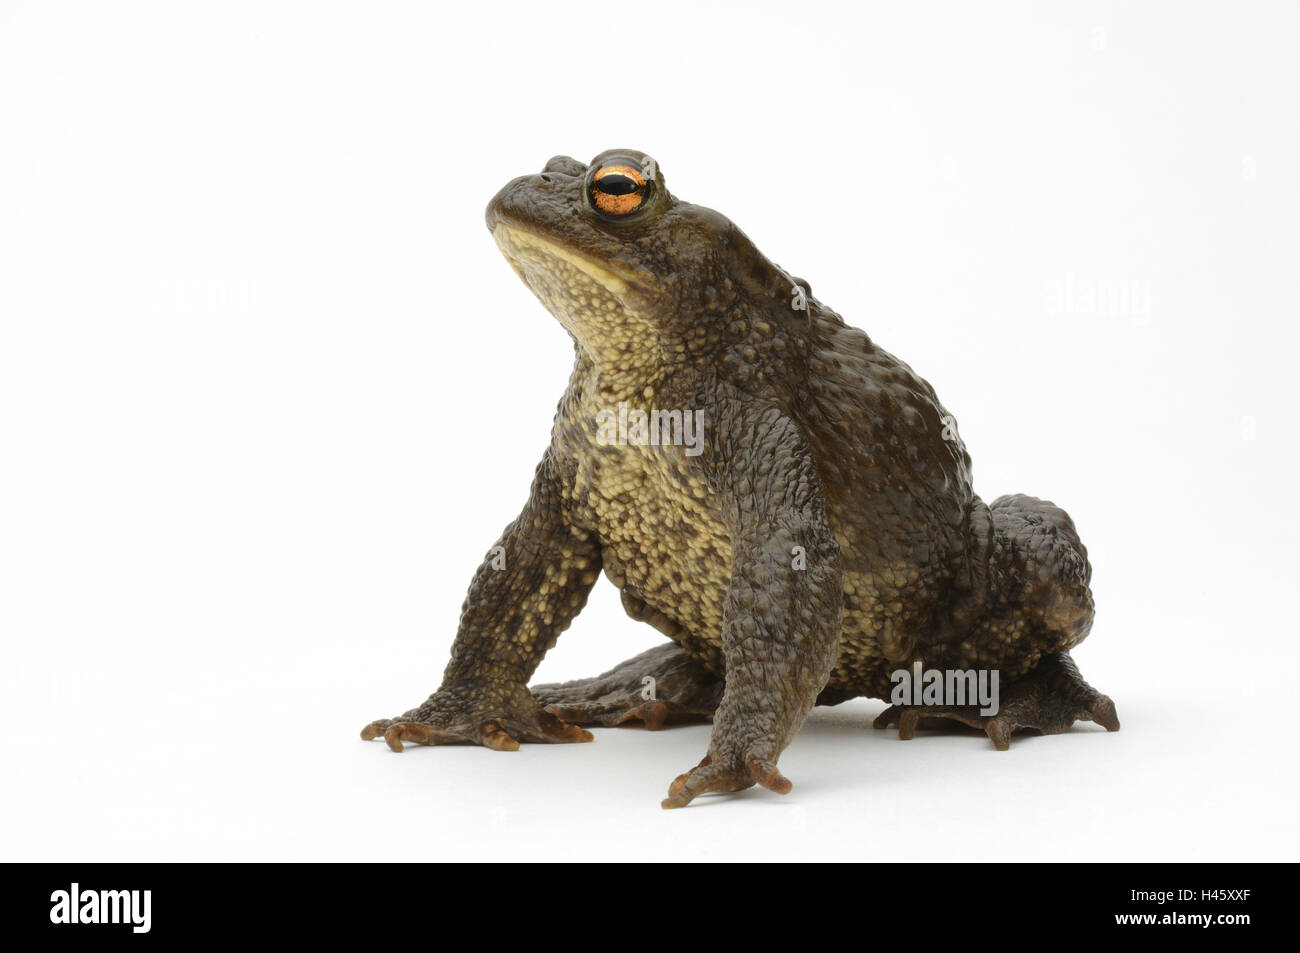 Terre, crapaud Bufo bufo, Banque D'Images